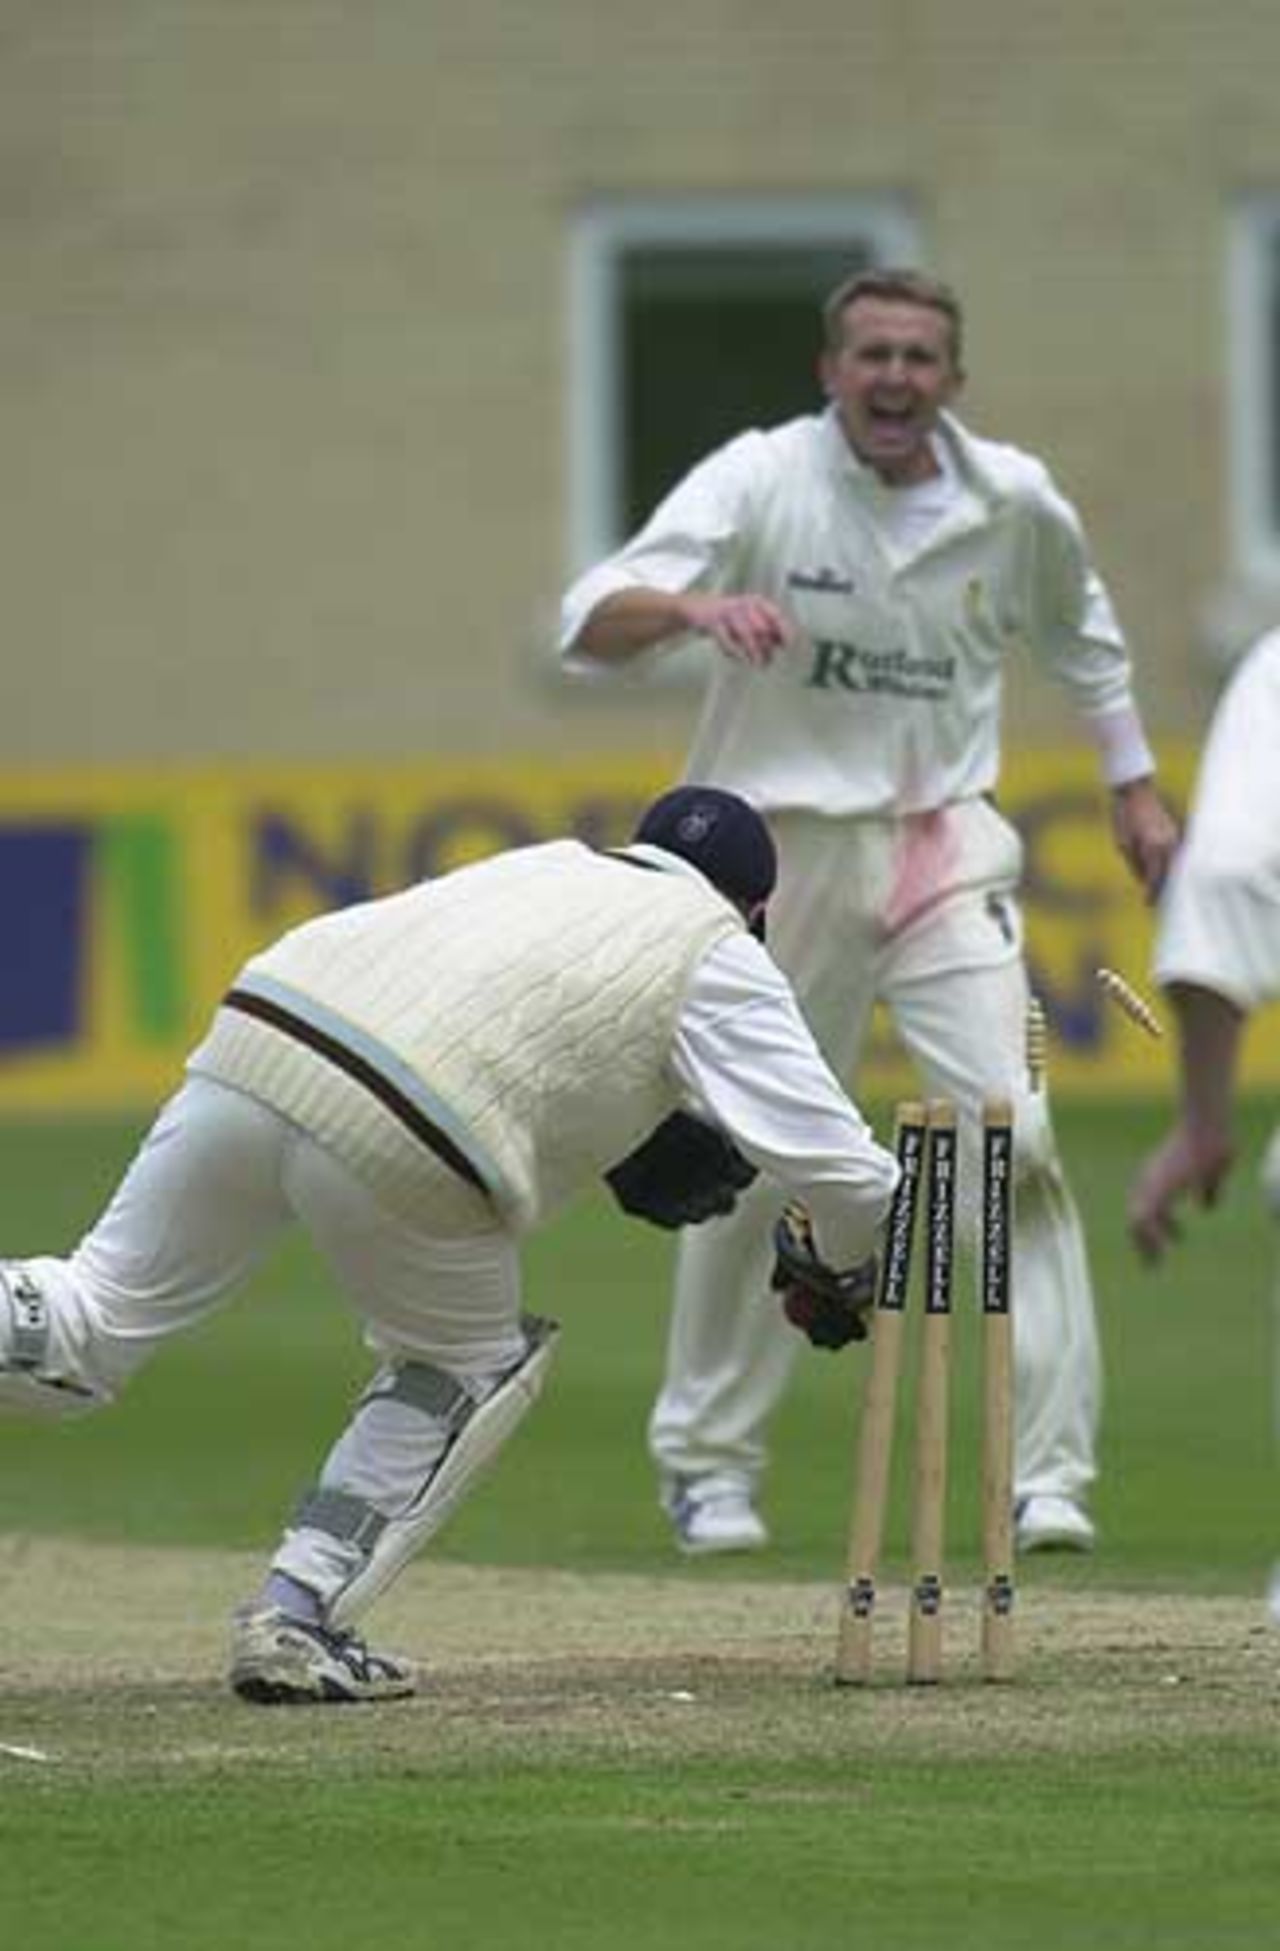 Derbyshire keeper Karl Krikken effects the run out of Nicky Boje for 10 in the Notts second innings, Notts v Derby, County Championship, 15 Jun 2002